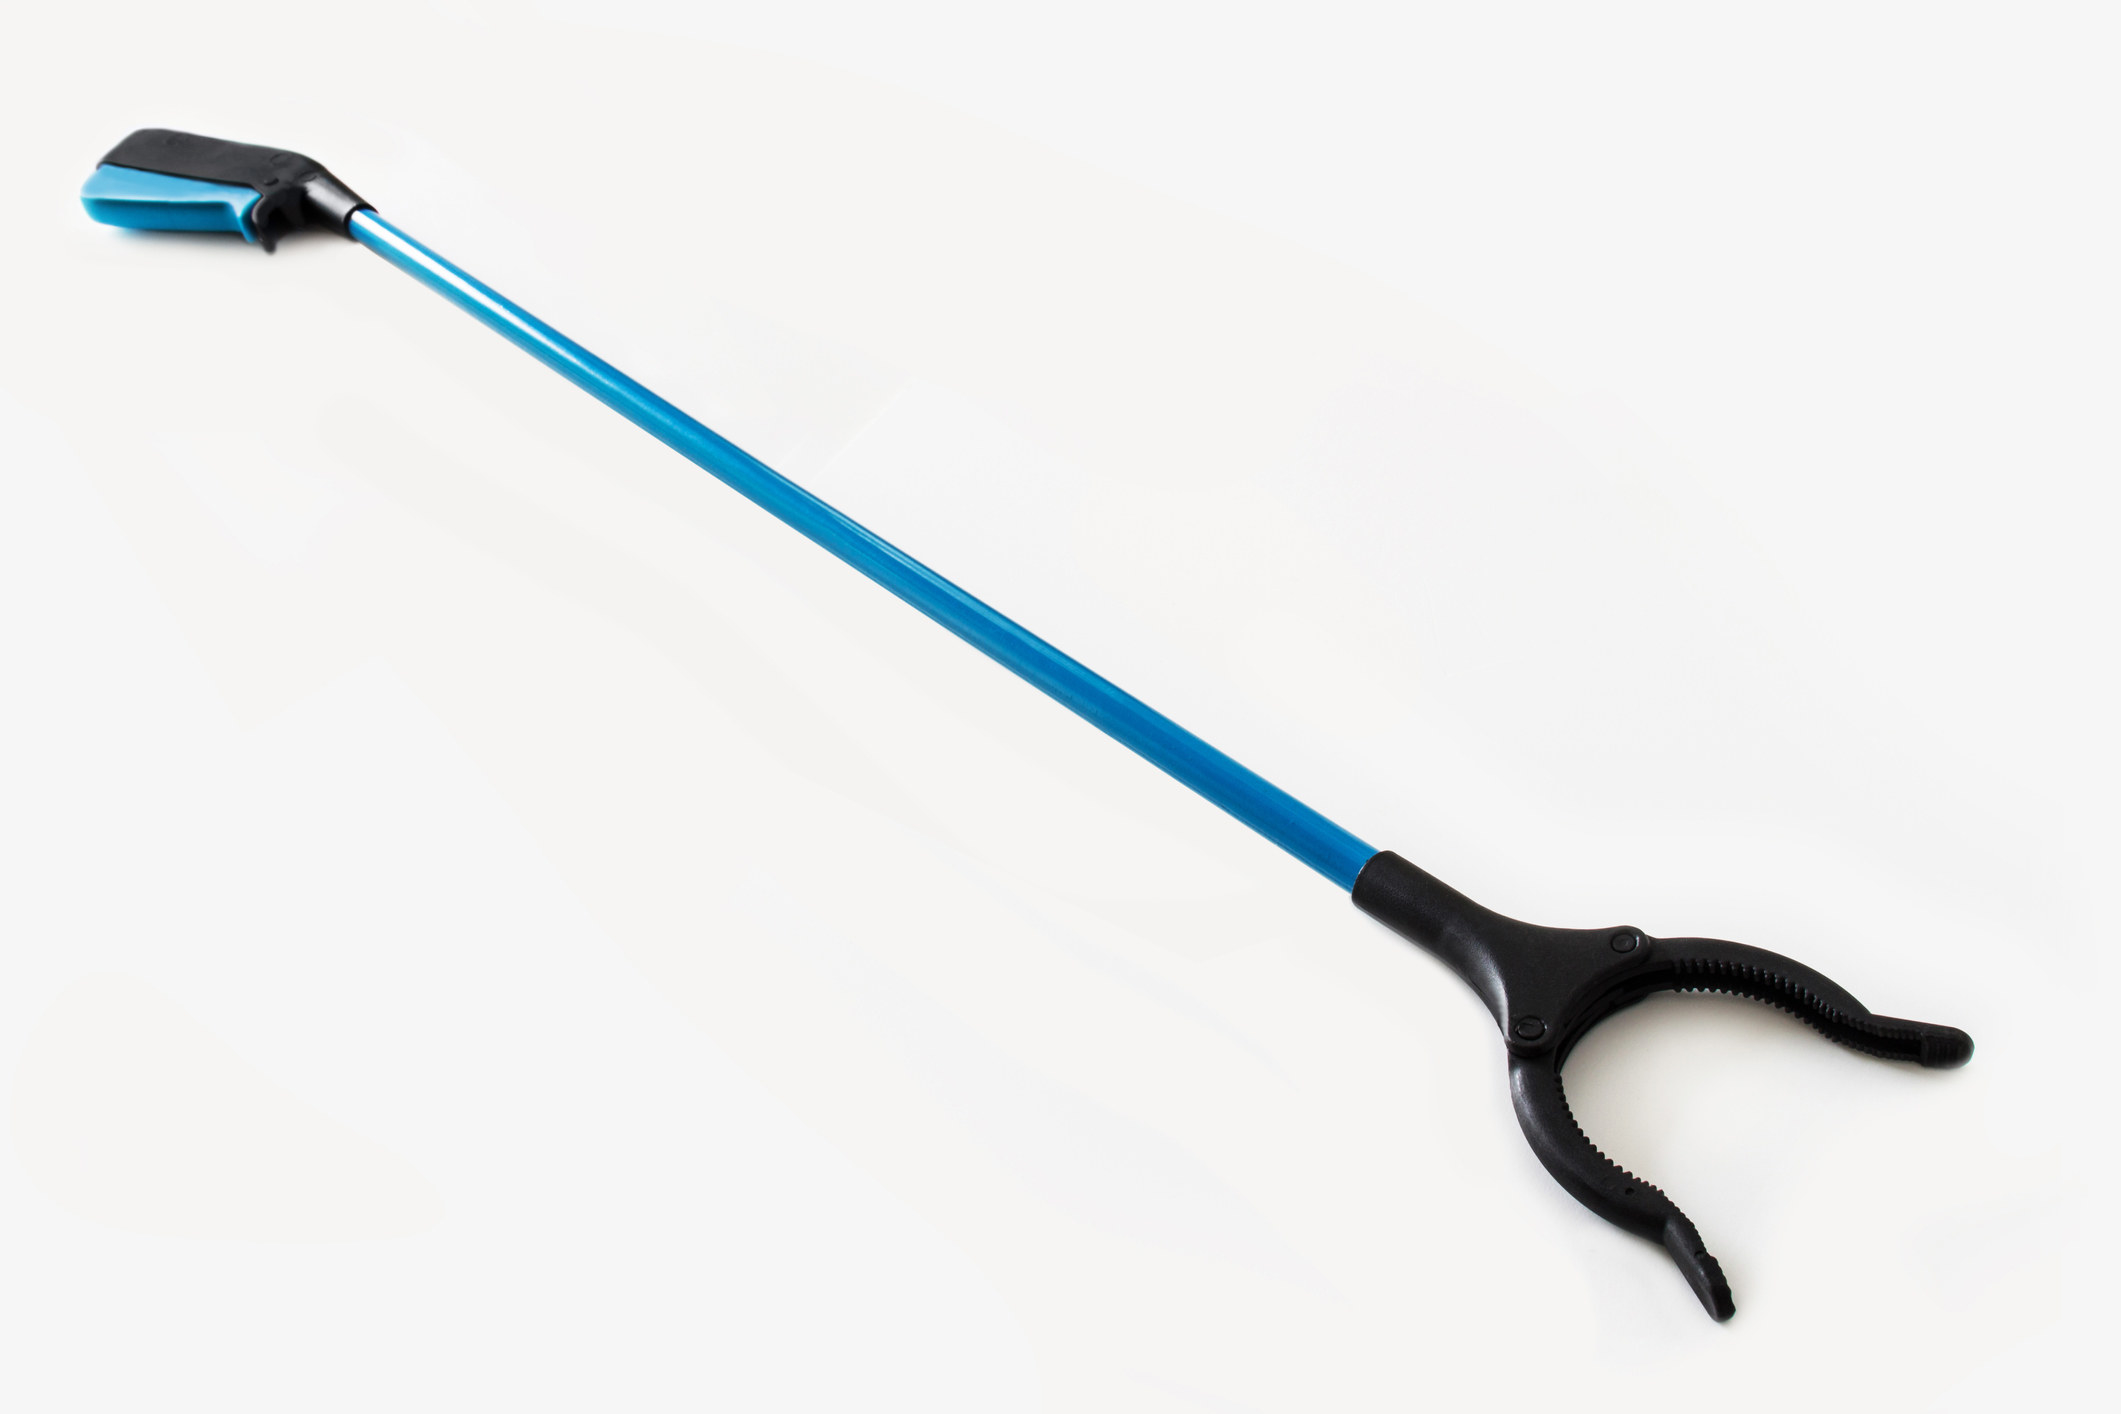 A grabber for reaching things